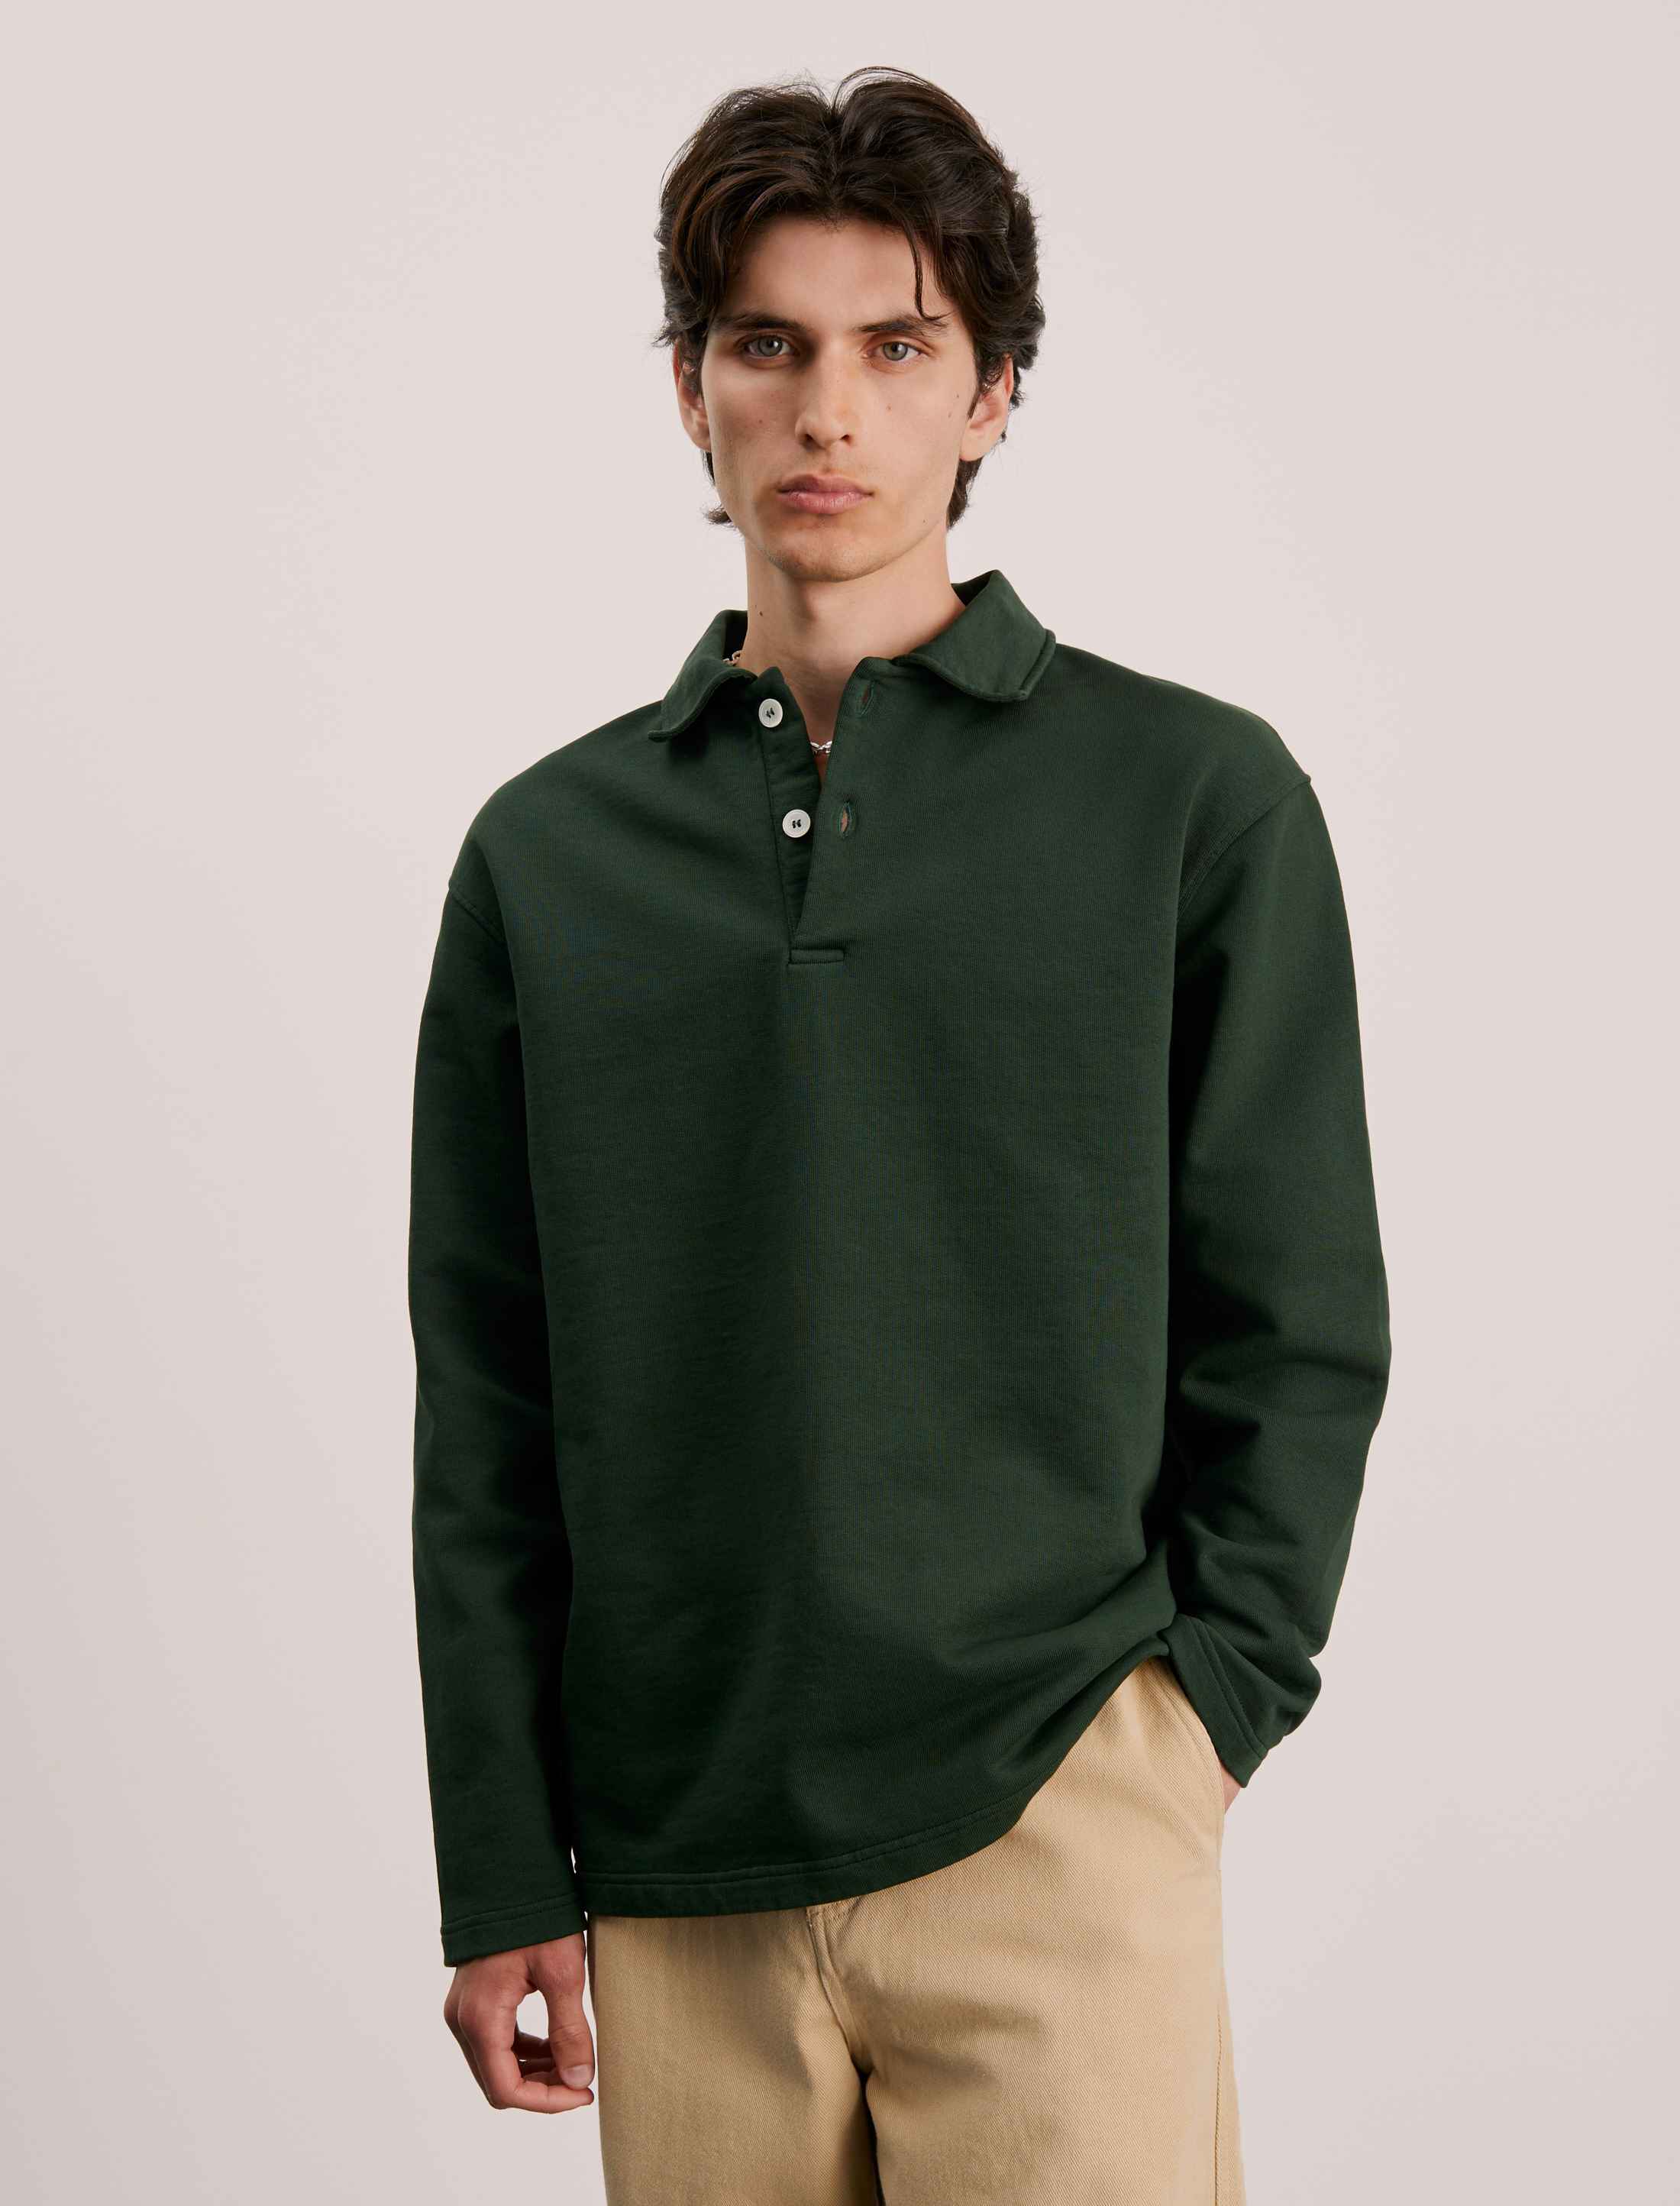 ANOTHER Polo Shirt 1.0, Evergreen – ANOTHER ASPECT